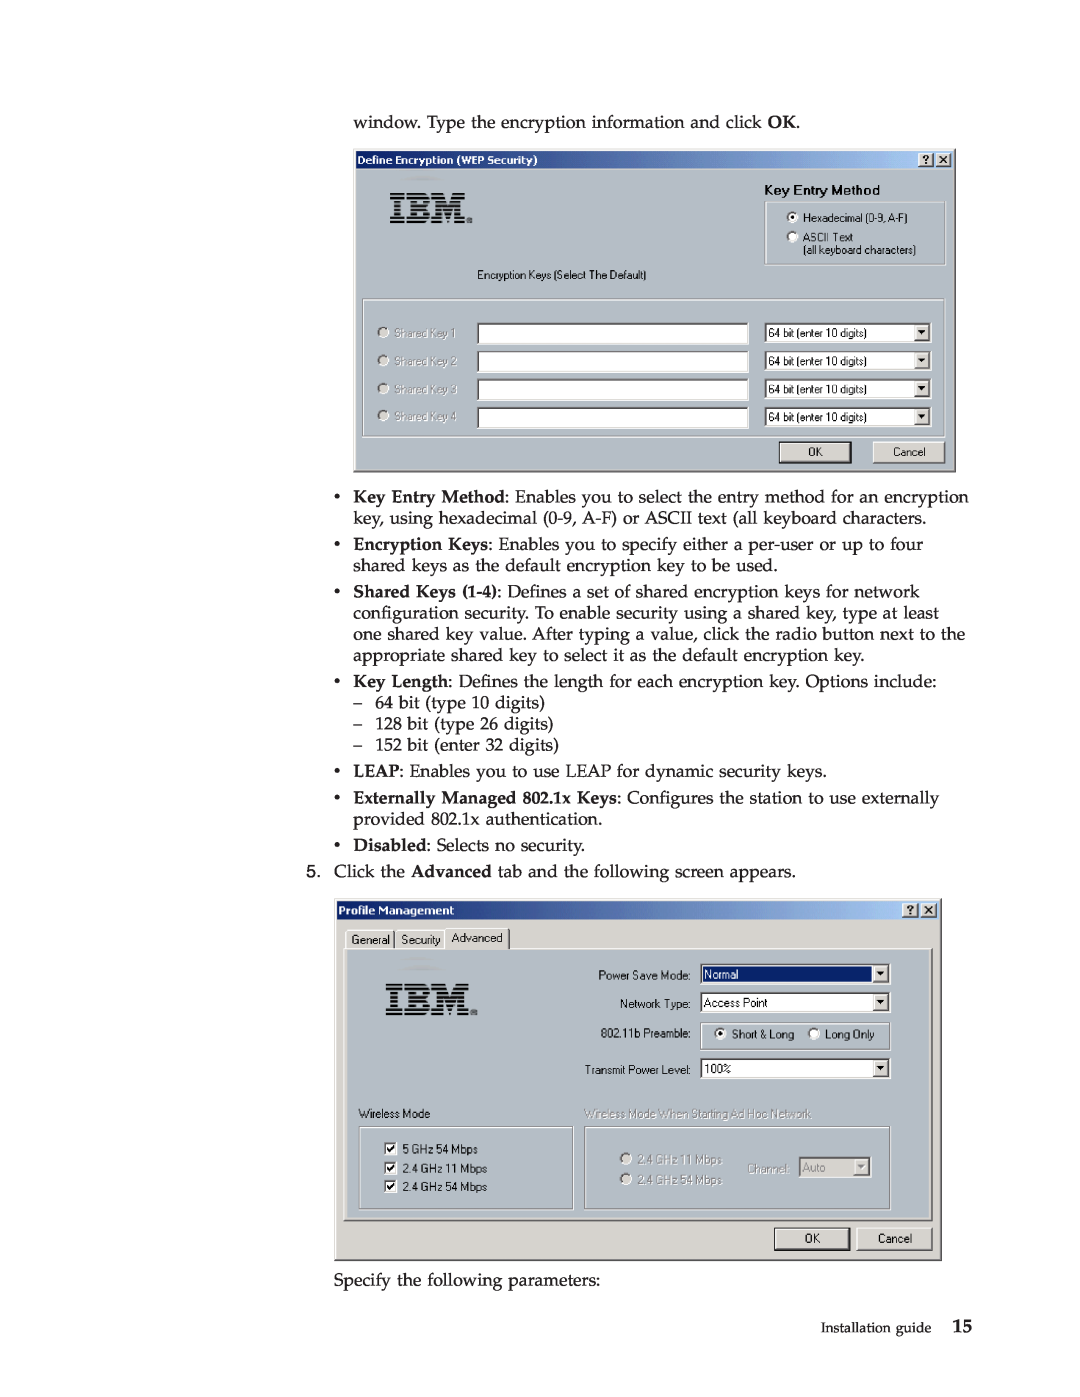 Trust Computer Products IBM 802.11a/b/g Wireless CardBus Adapter window. Type the encryption information and click OK 